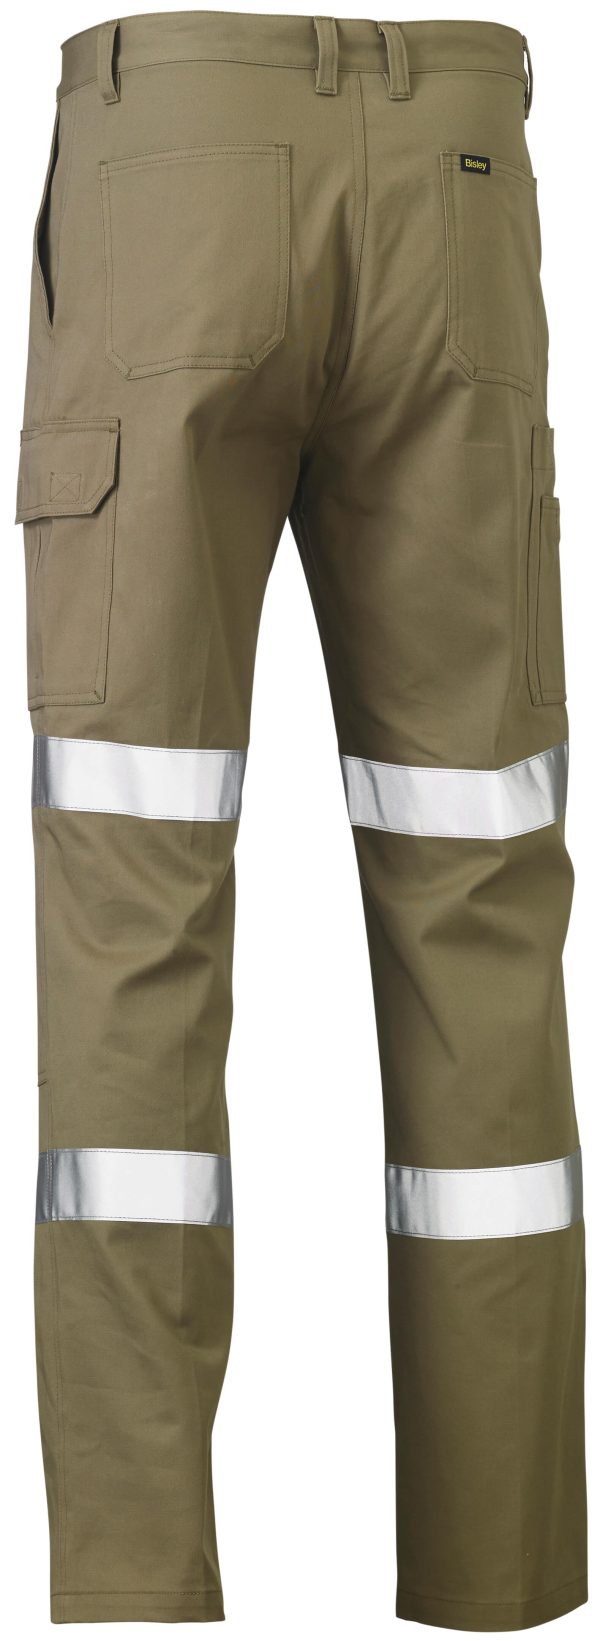 mens biomotion 3m taped utility pant. 100% cotton. light weight. 240gsm bp6999t